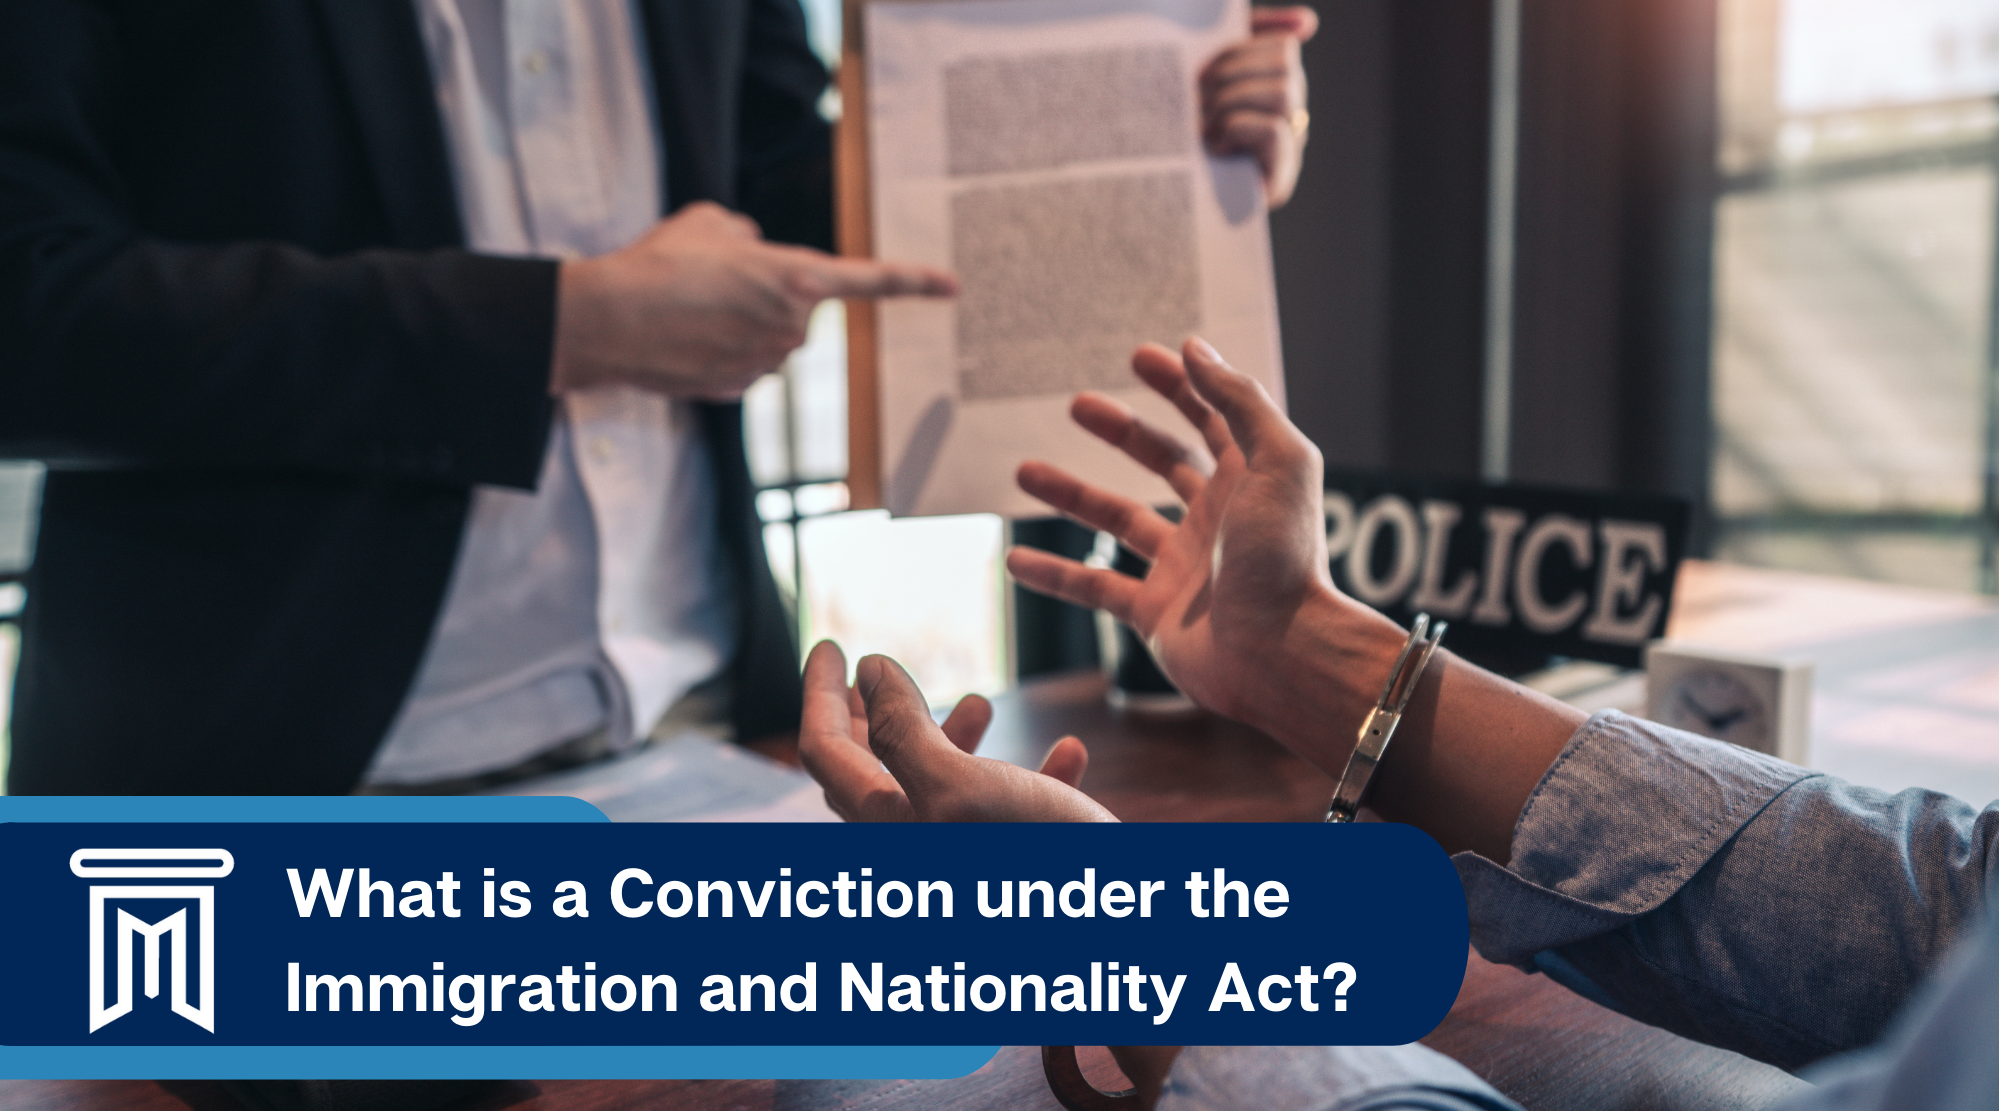 What is a conviction under the Immigration and Nationality Act?